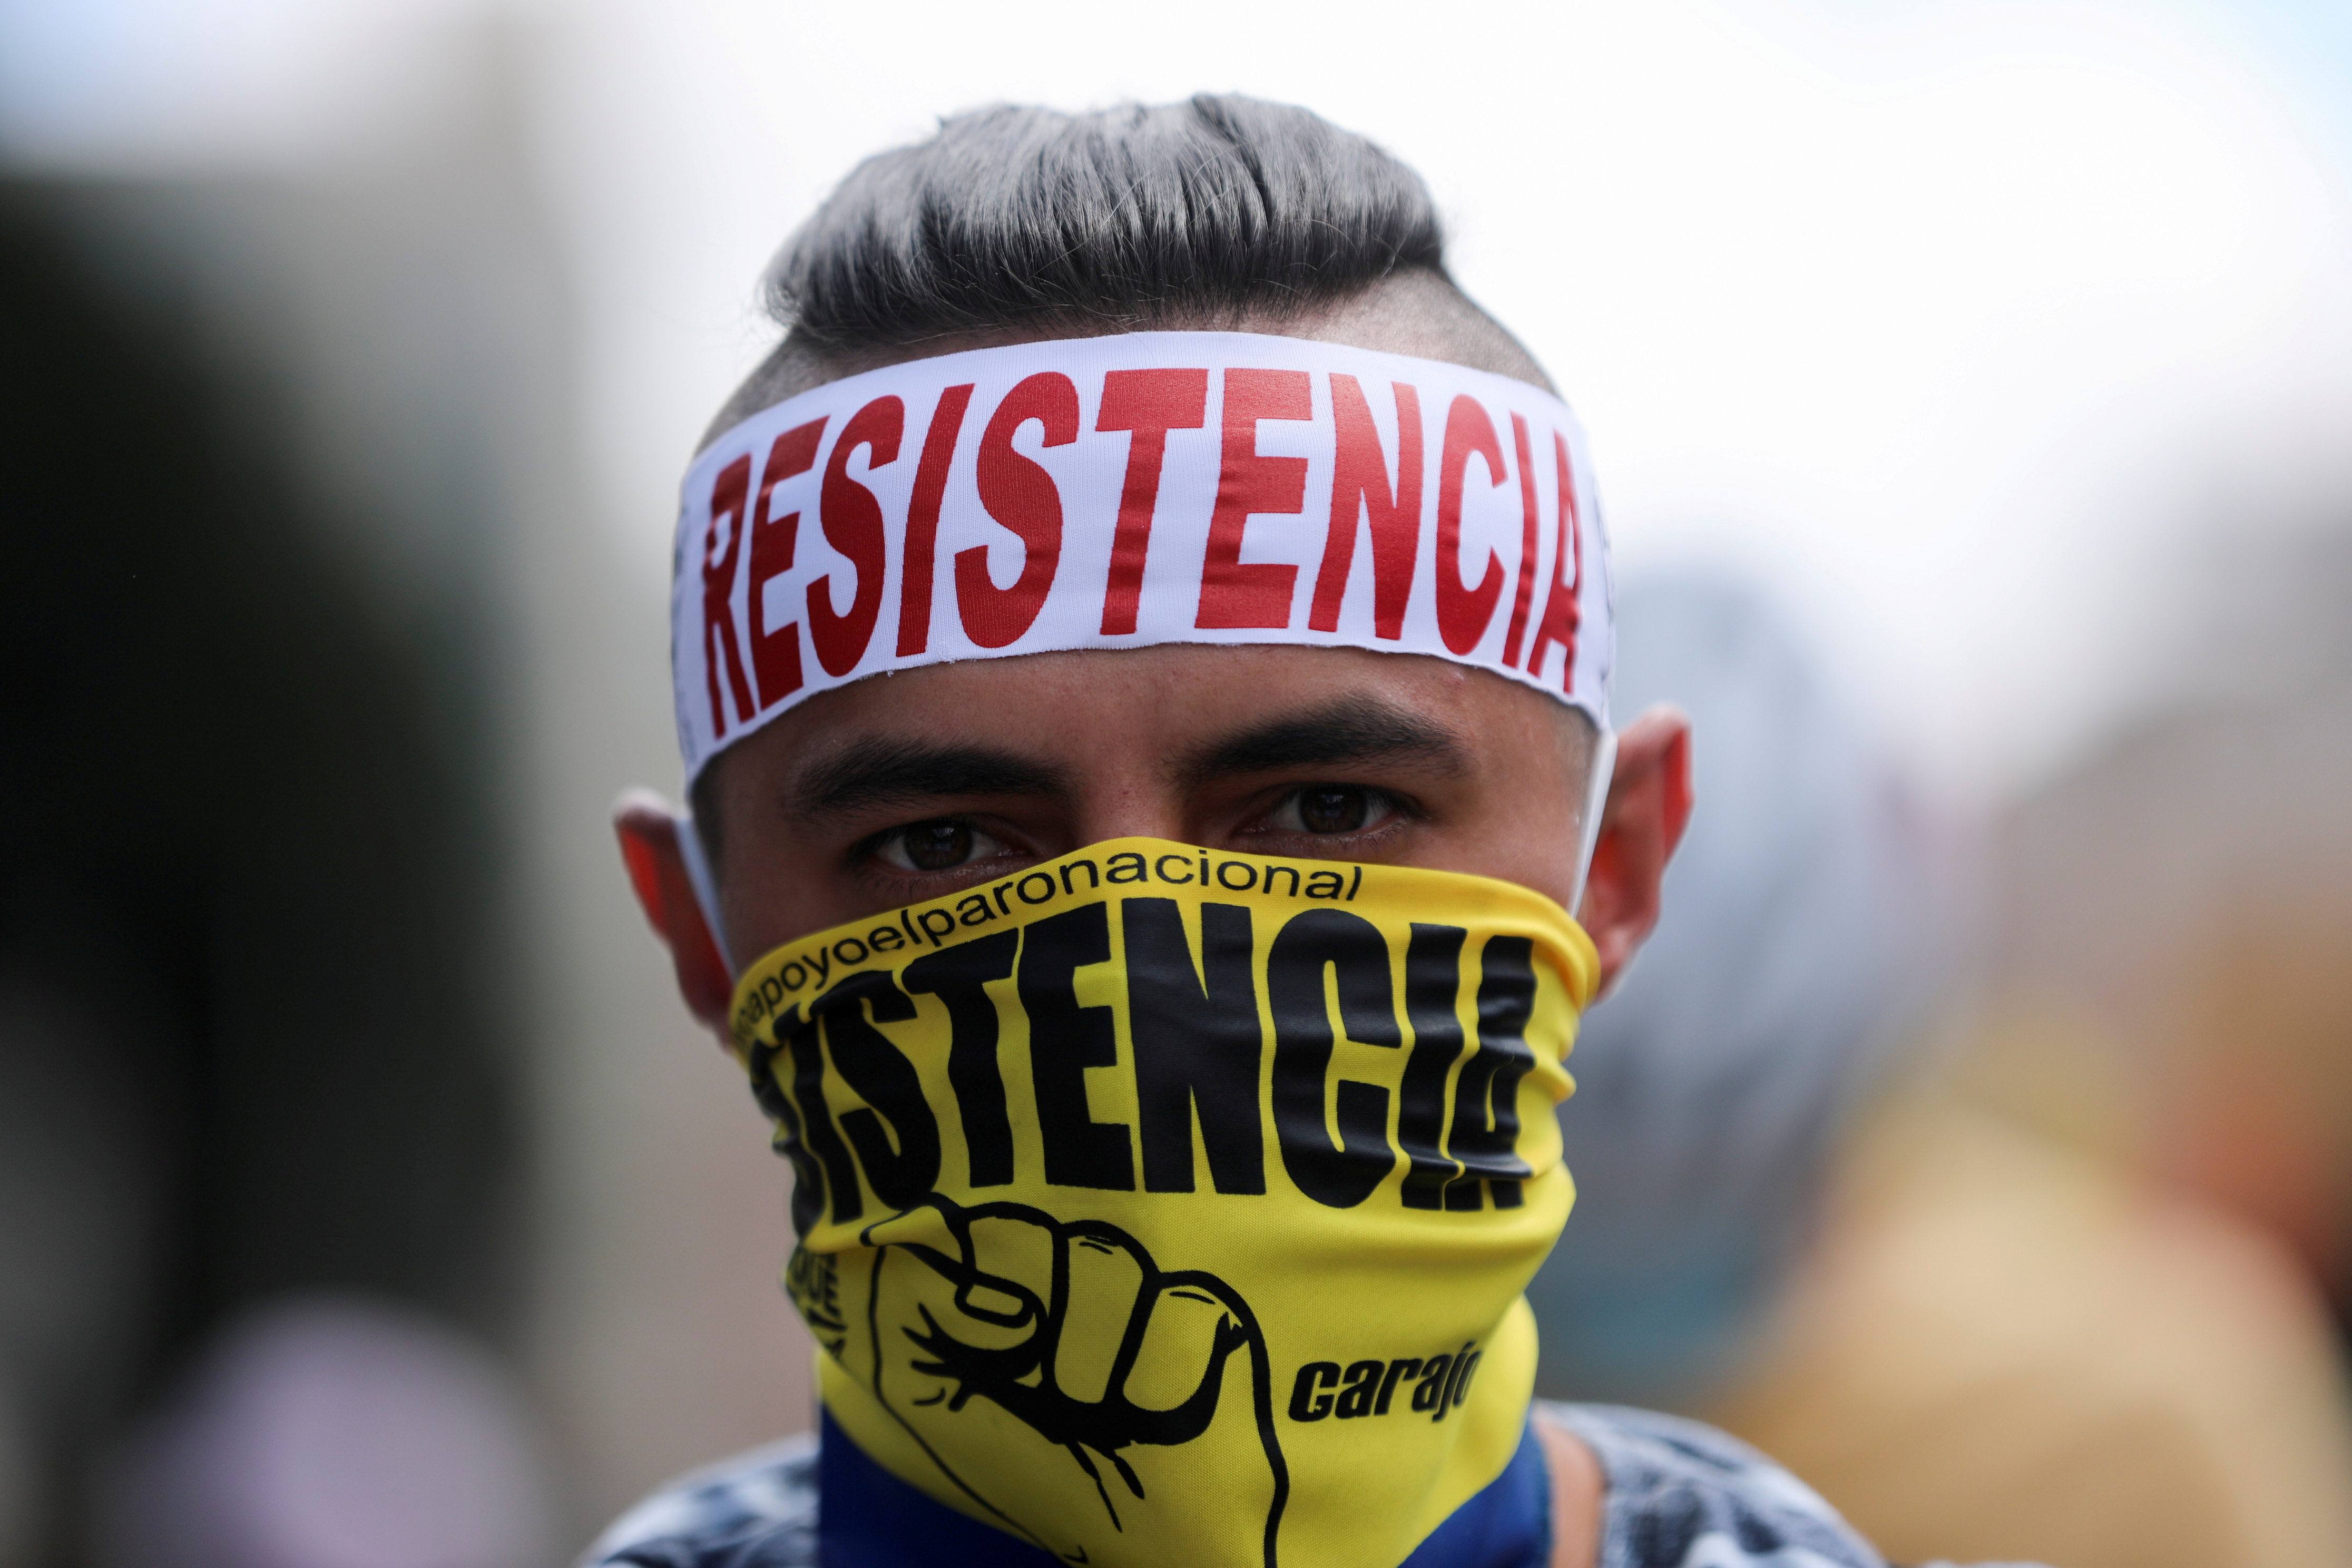 Anti-government demonstrations continue, in Bogota